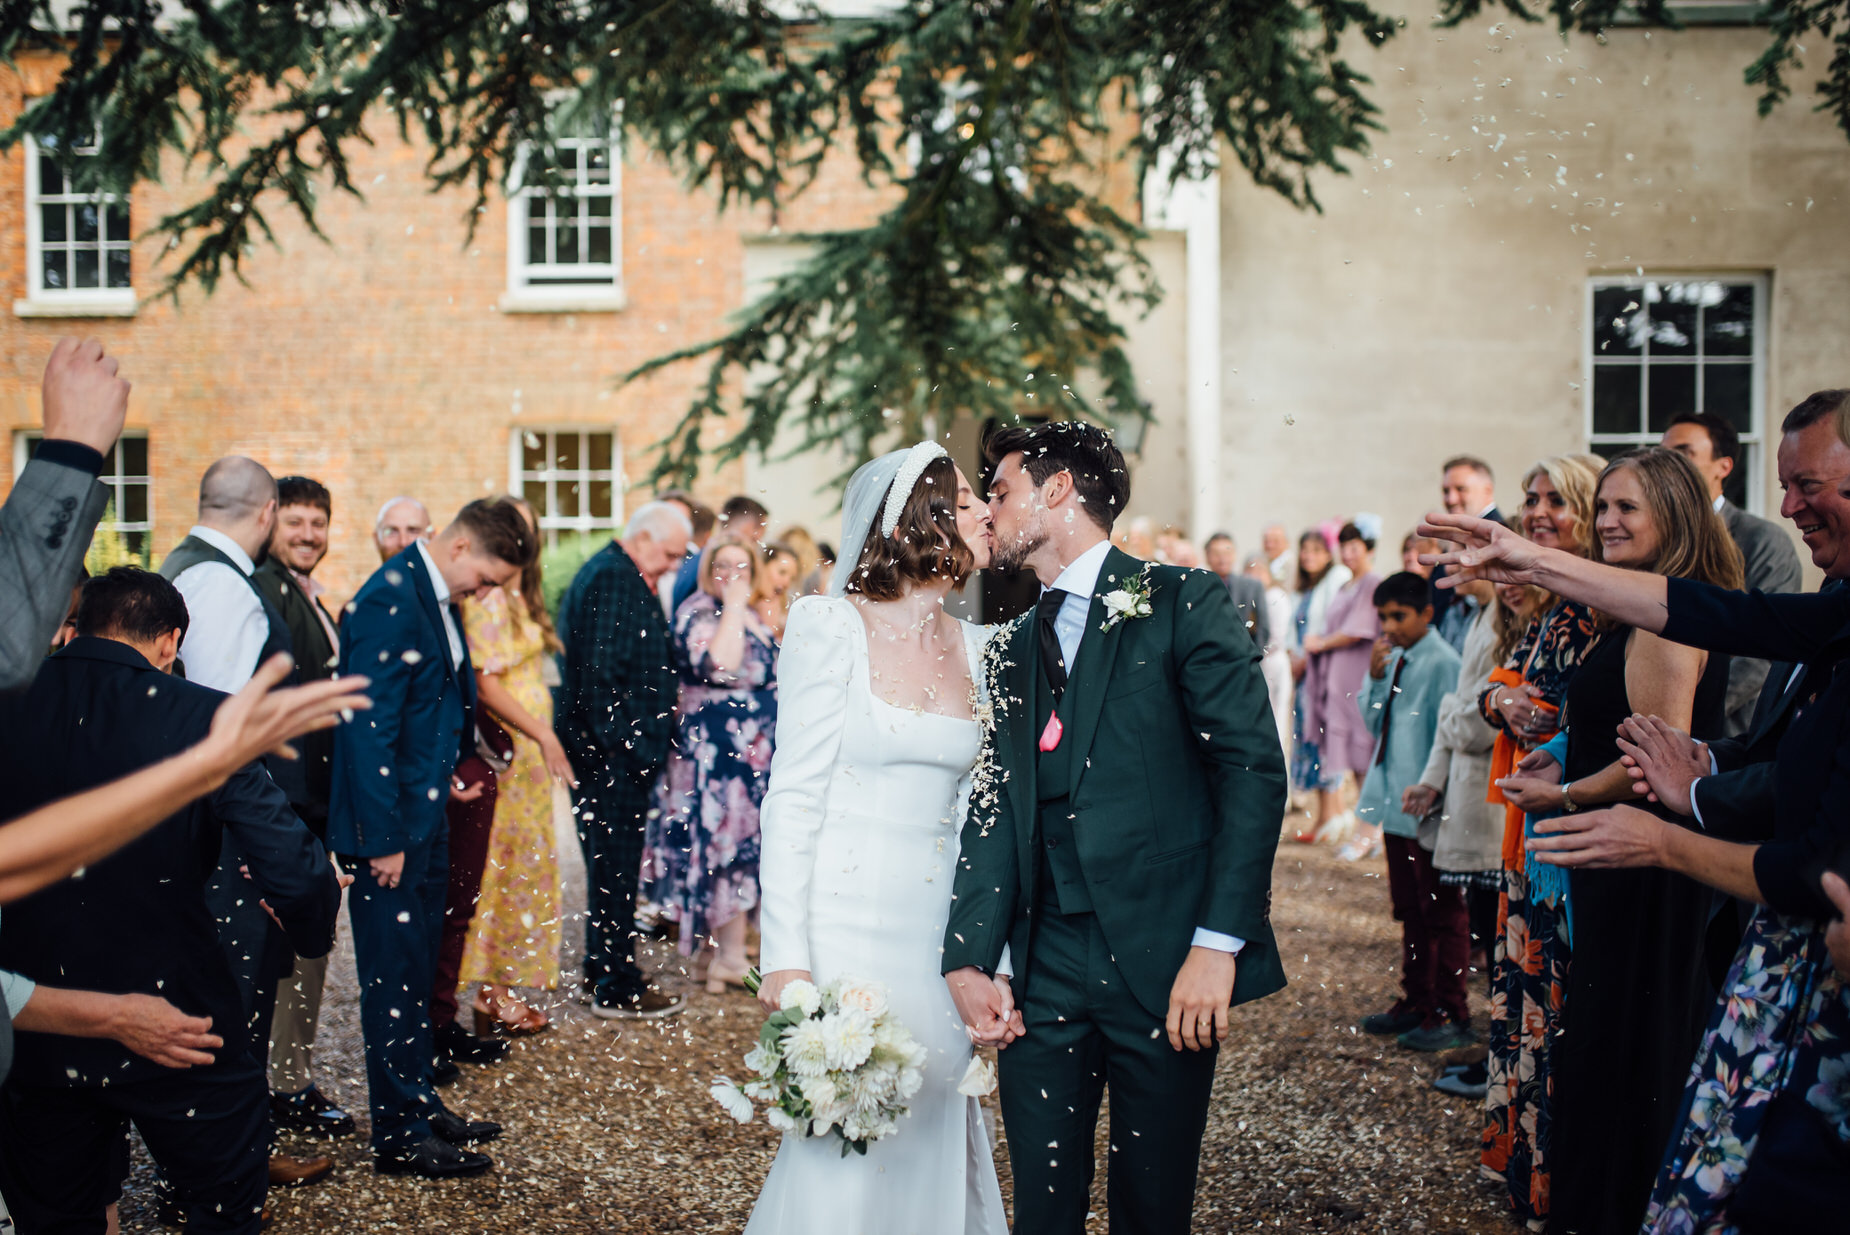 authentic wedding photography, Aswarby Rectory Wedding, michelle wood photographer, confetti kiss